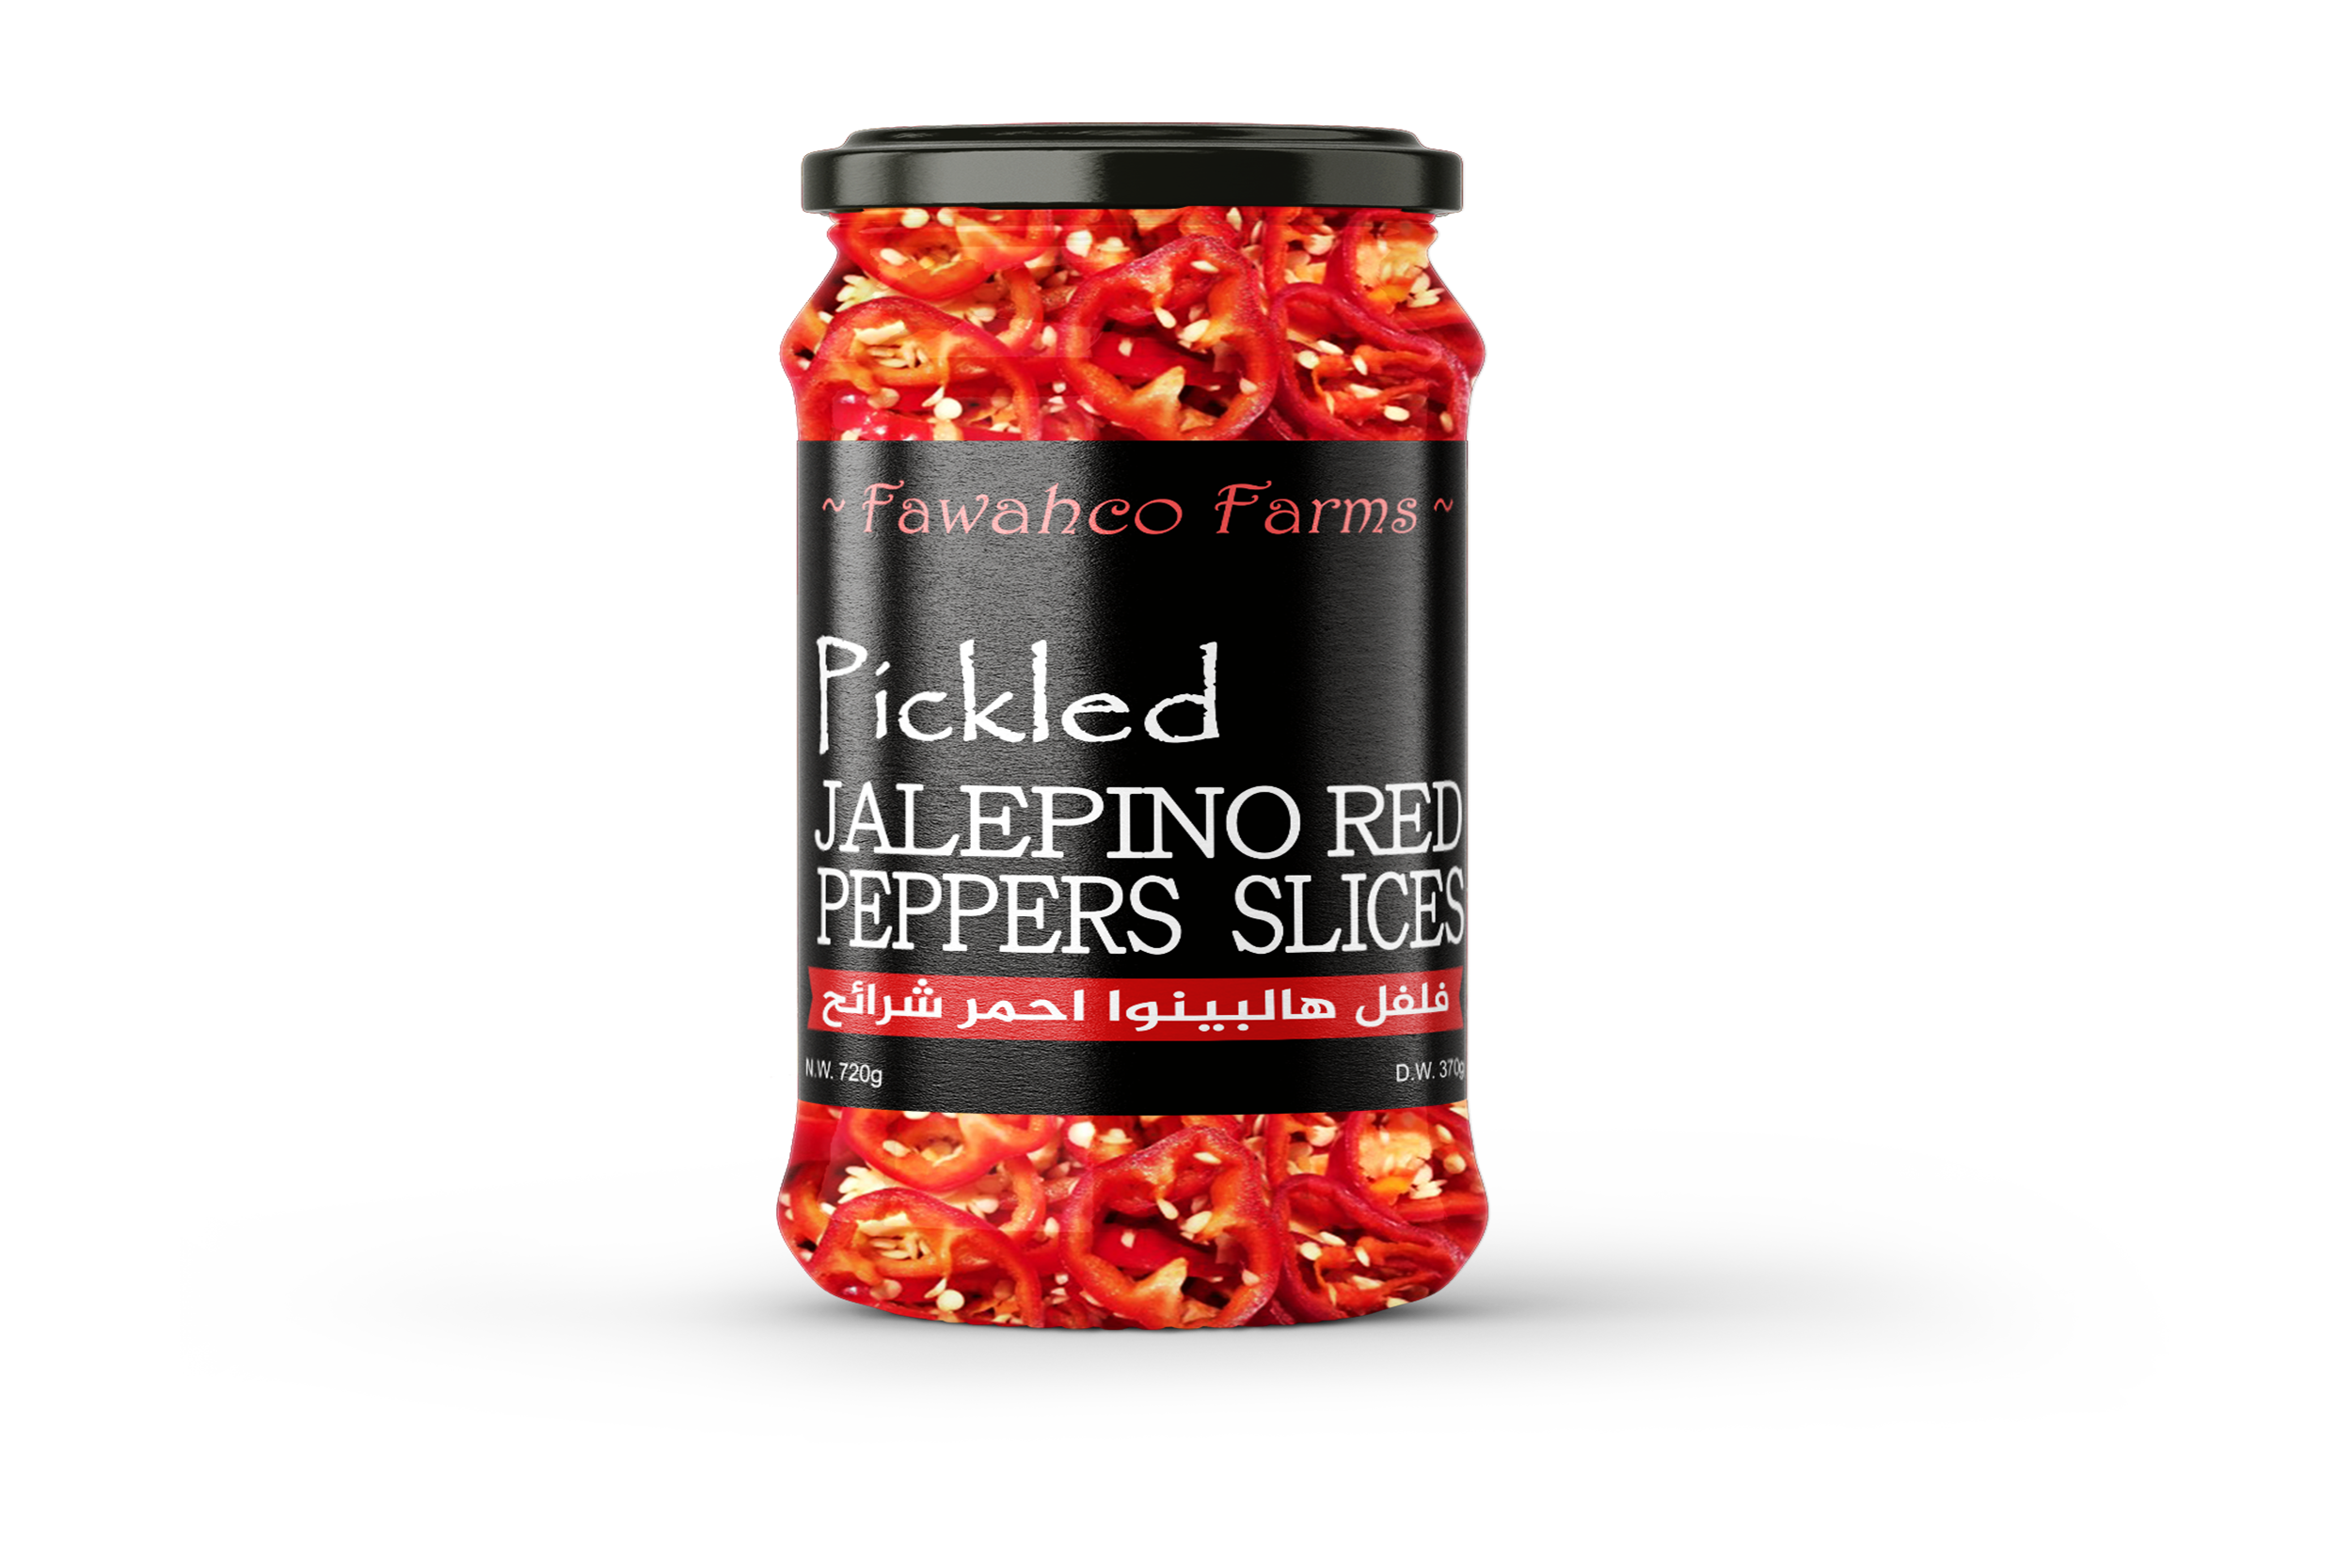 Jalepino Red Peppers Slices